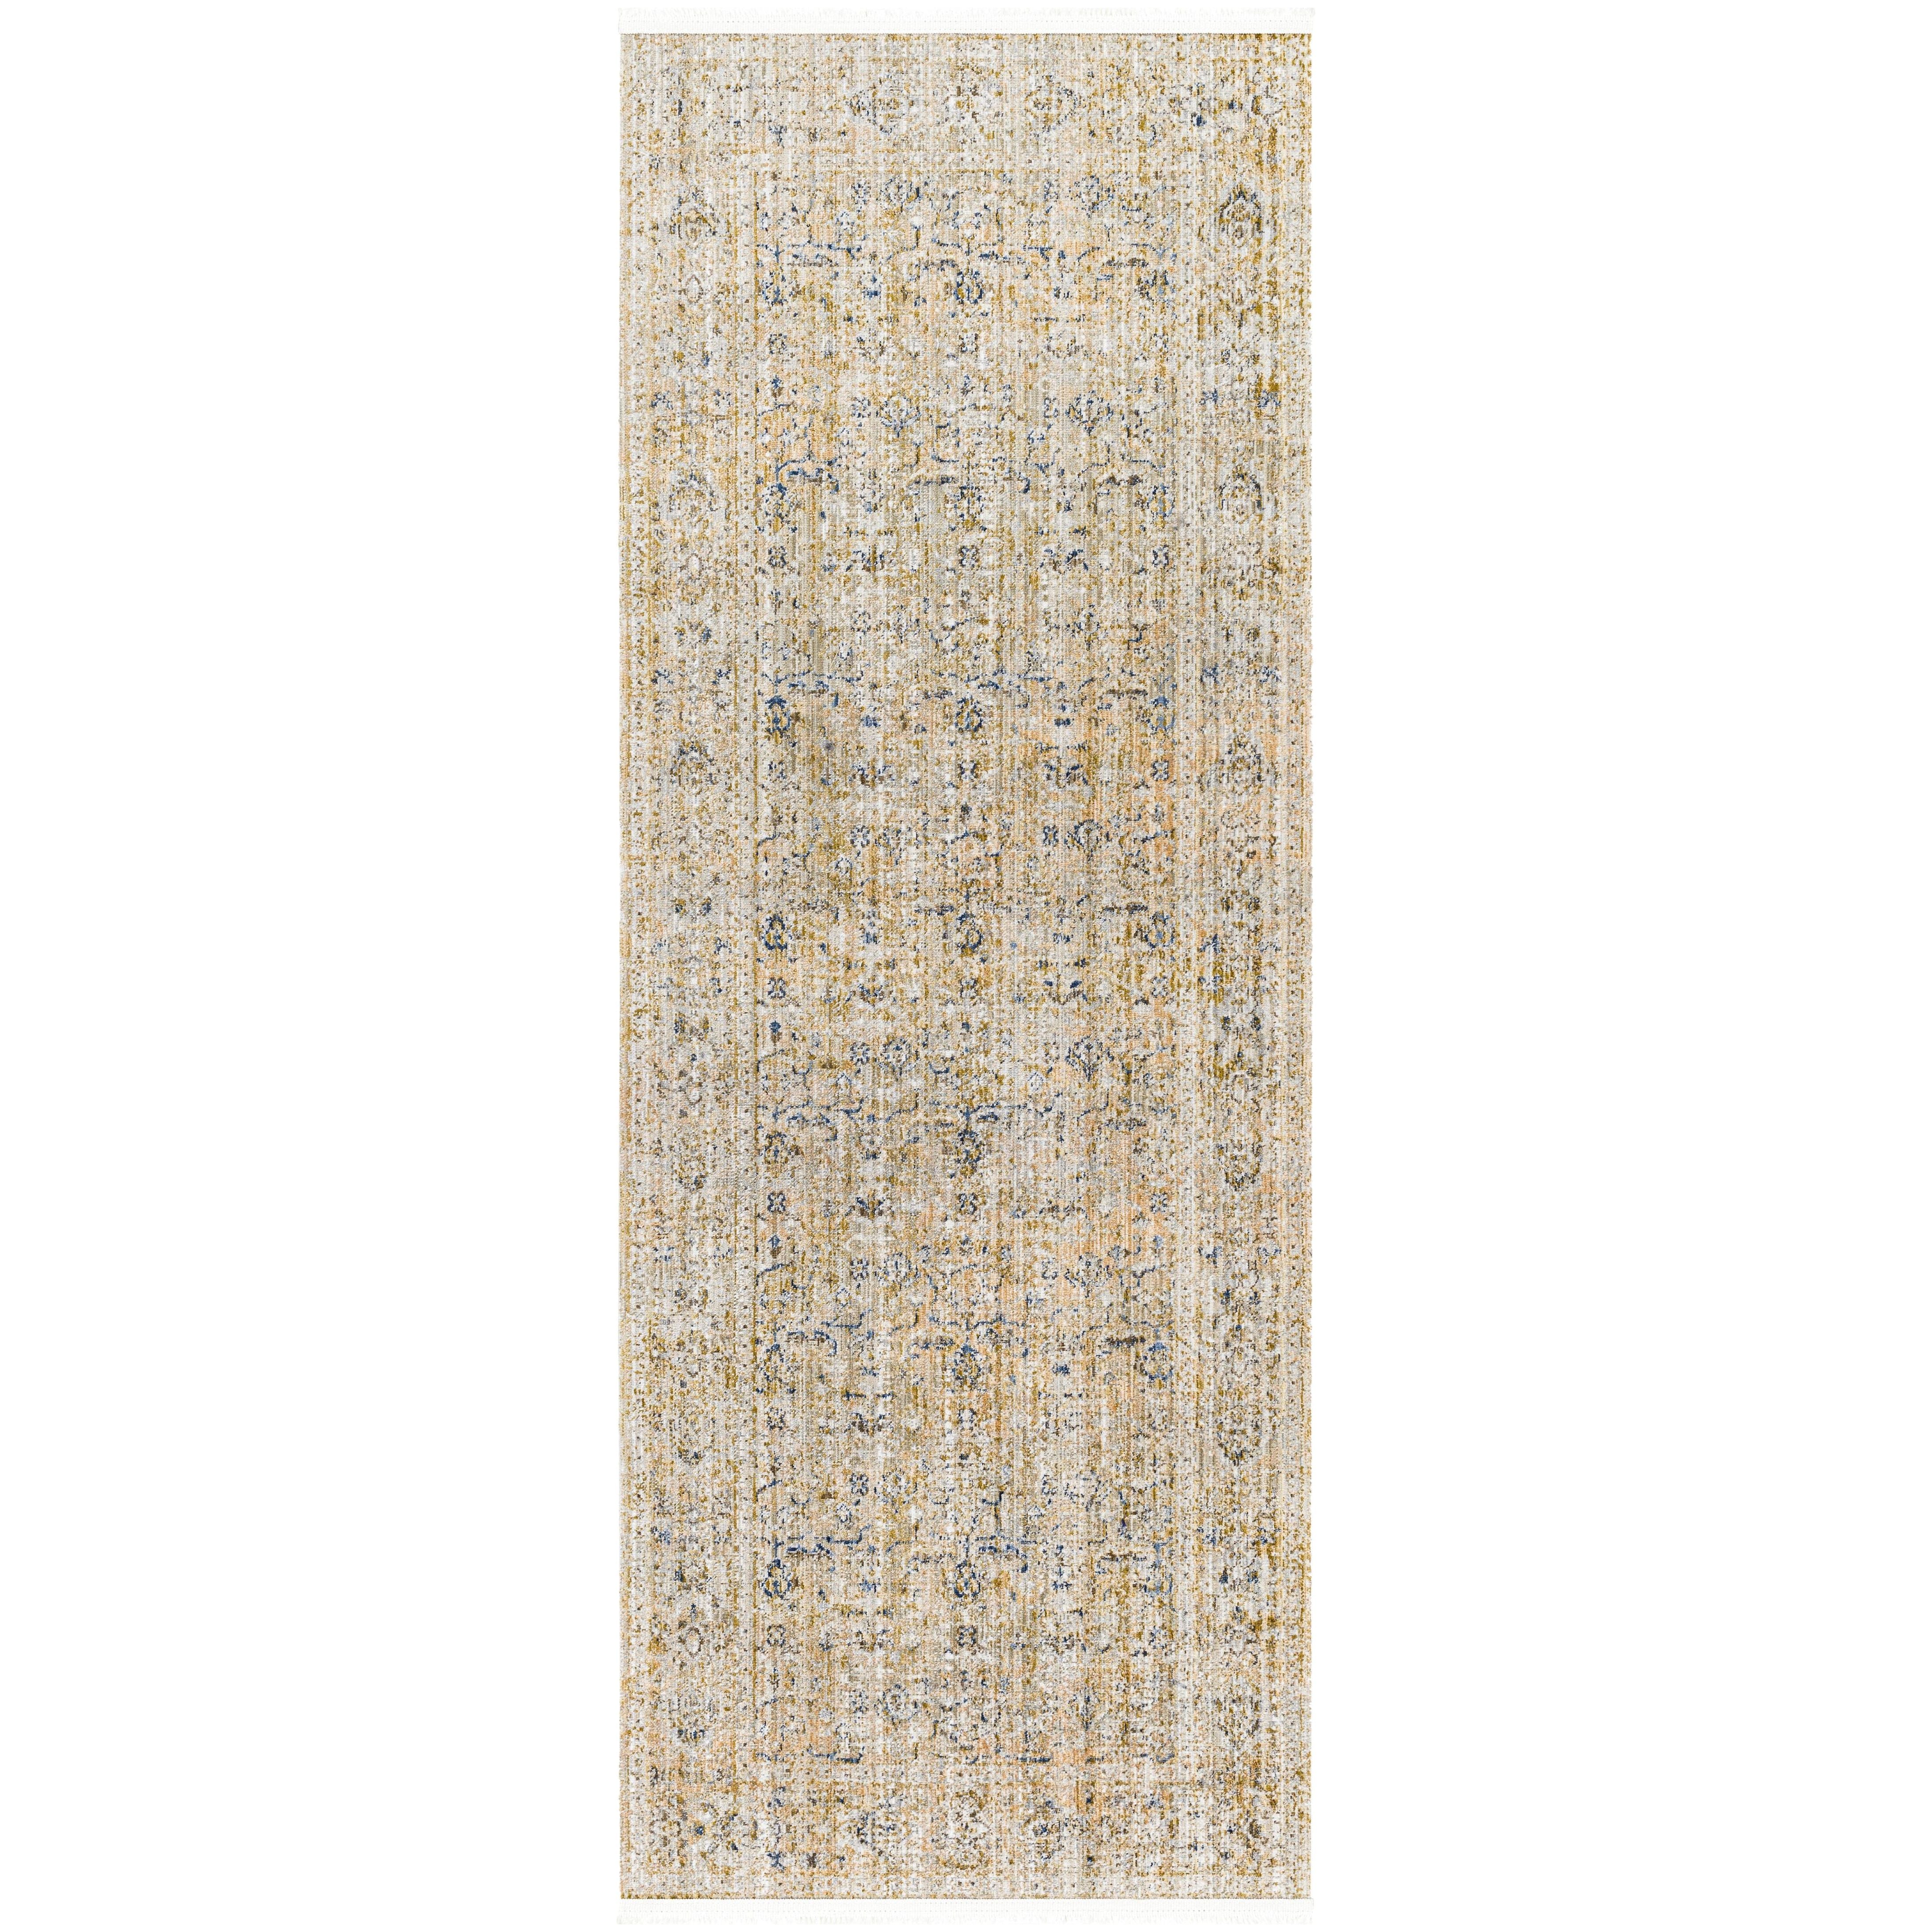 The Margaret area rug is a truly special collection from our Becki Owens x Surya line. A beautiful addition to any room, the Margaret area rug features a unique combination of warm neutrals and navy details. Amethyst Home provides interior design, new home construction design consulting, vintage area rugs, and lighting in the Des Moines metro area.